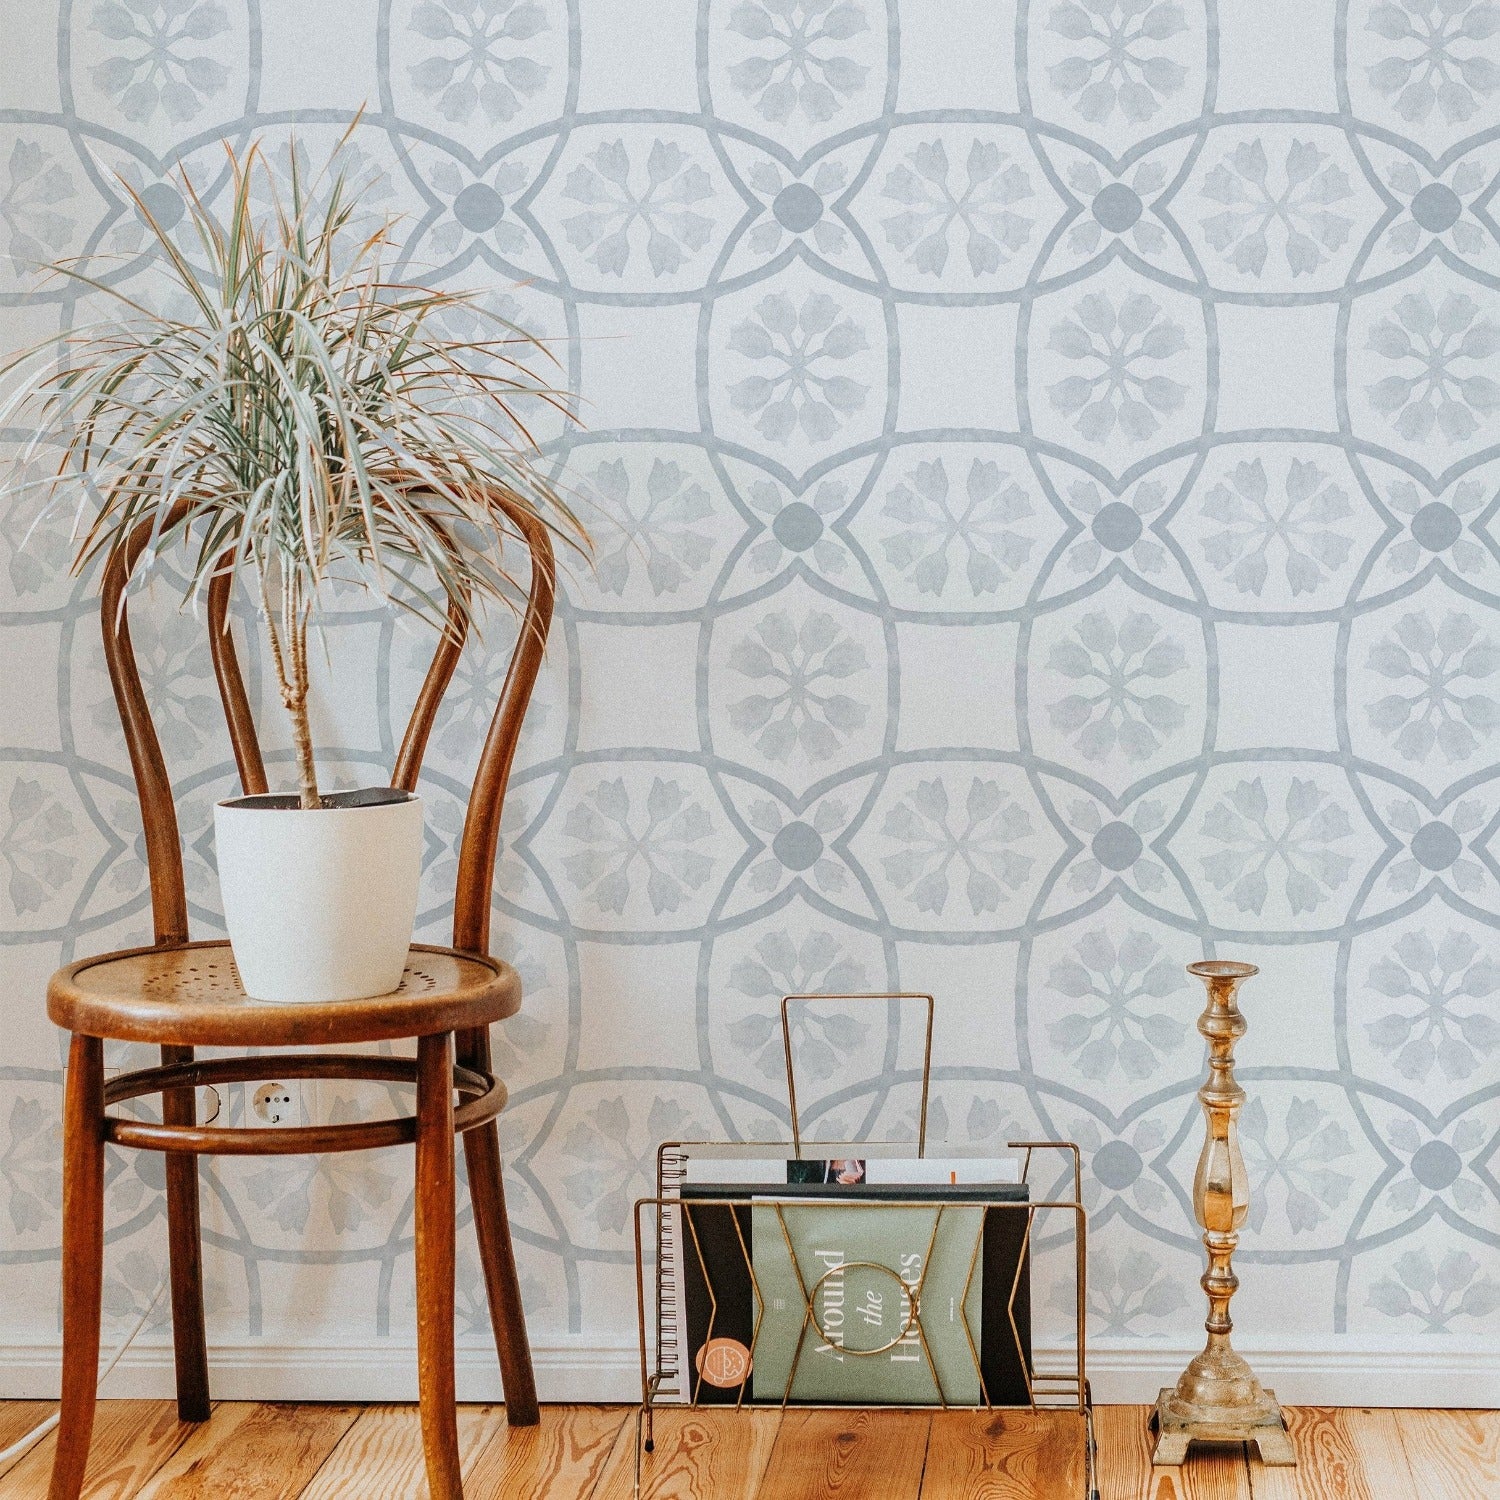 A cozy corner showcasing the 'Distressed Moroccan Tile - Pale Blue' wallpaper in a real-life setting. The subtle pale blue and grey tones create a tranquil ambiance, complemented by a vintage wooden chair, a potted plant, and antique decorative items that enhance the Moroccan-inspired aesthetic